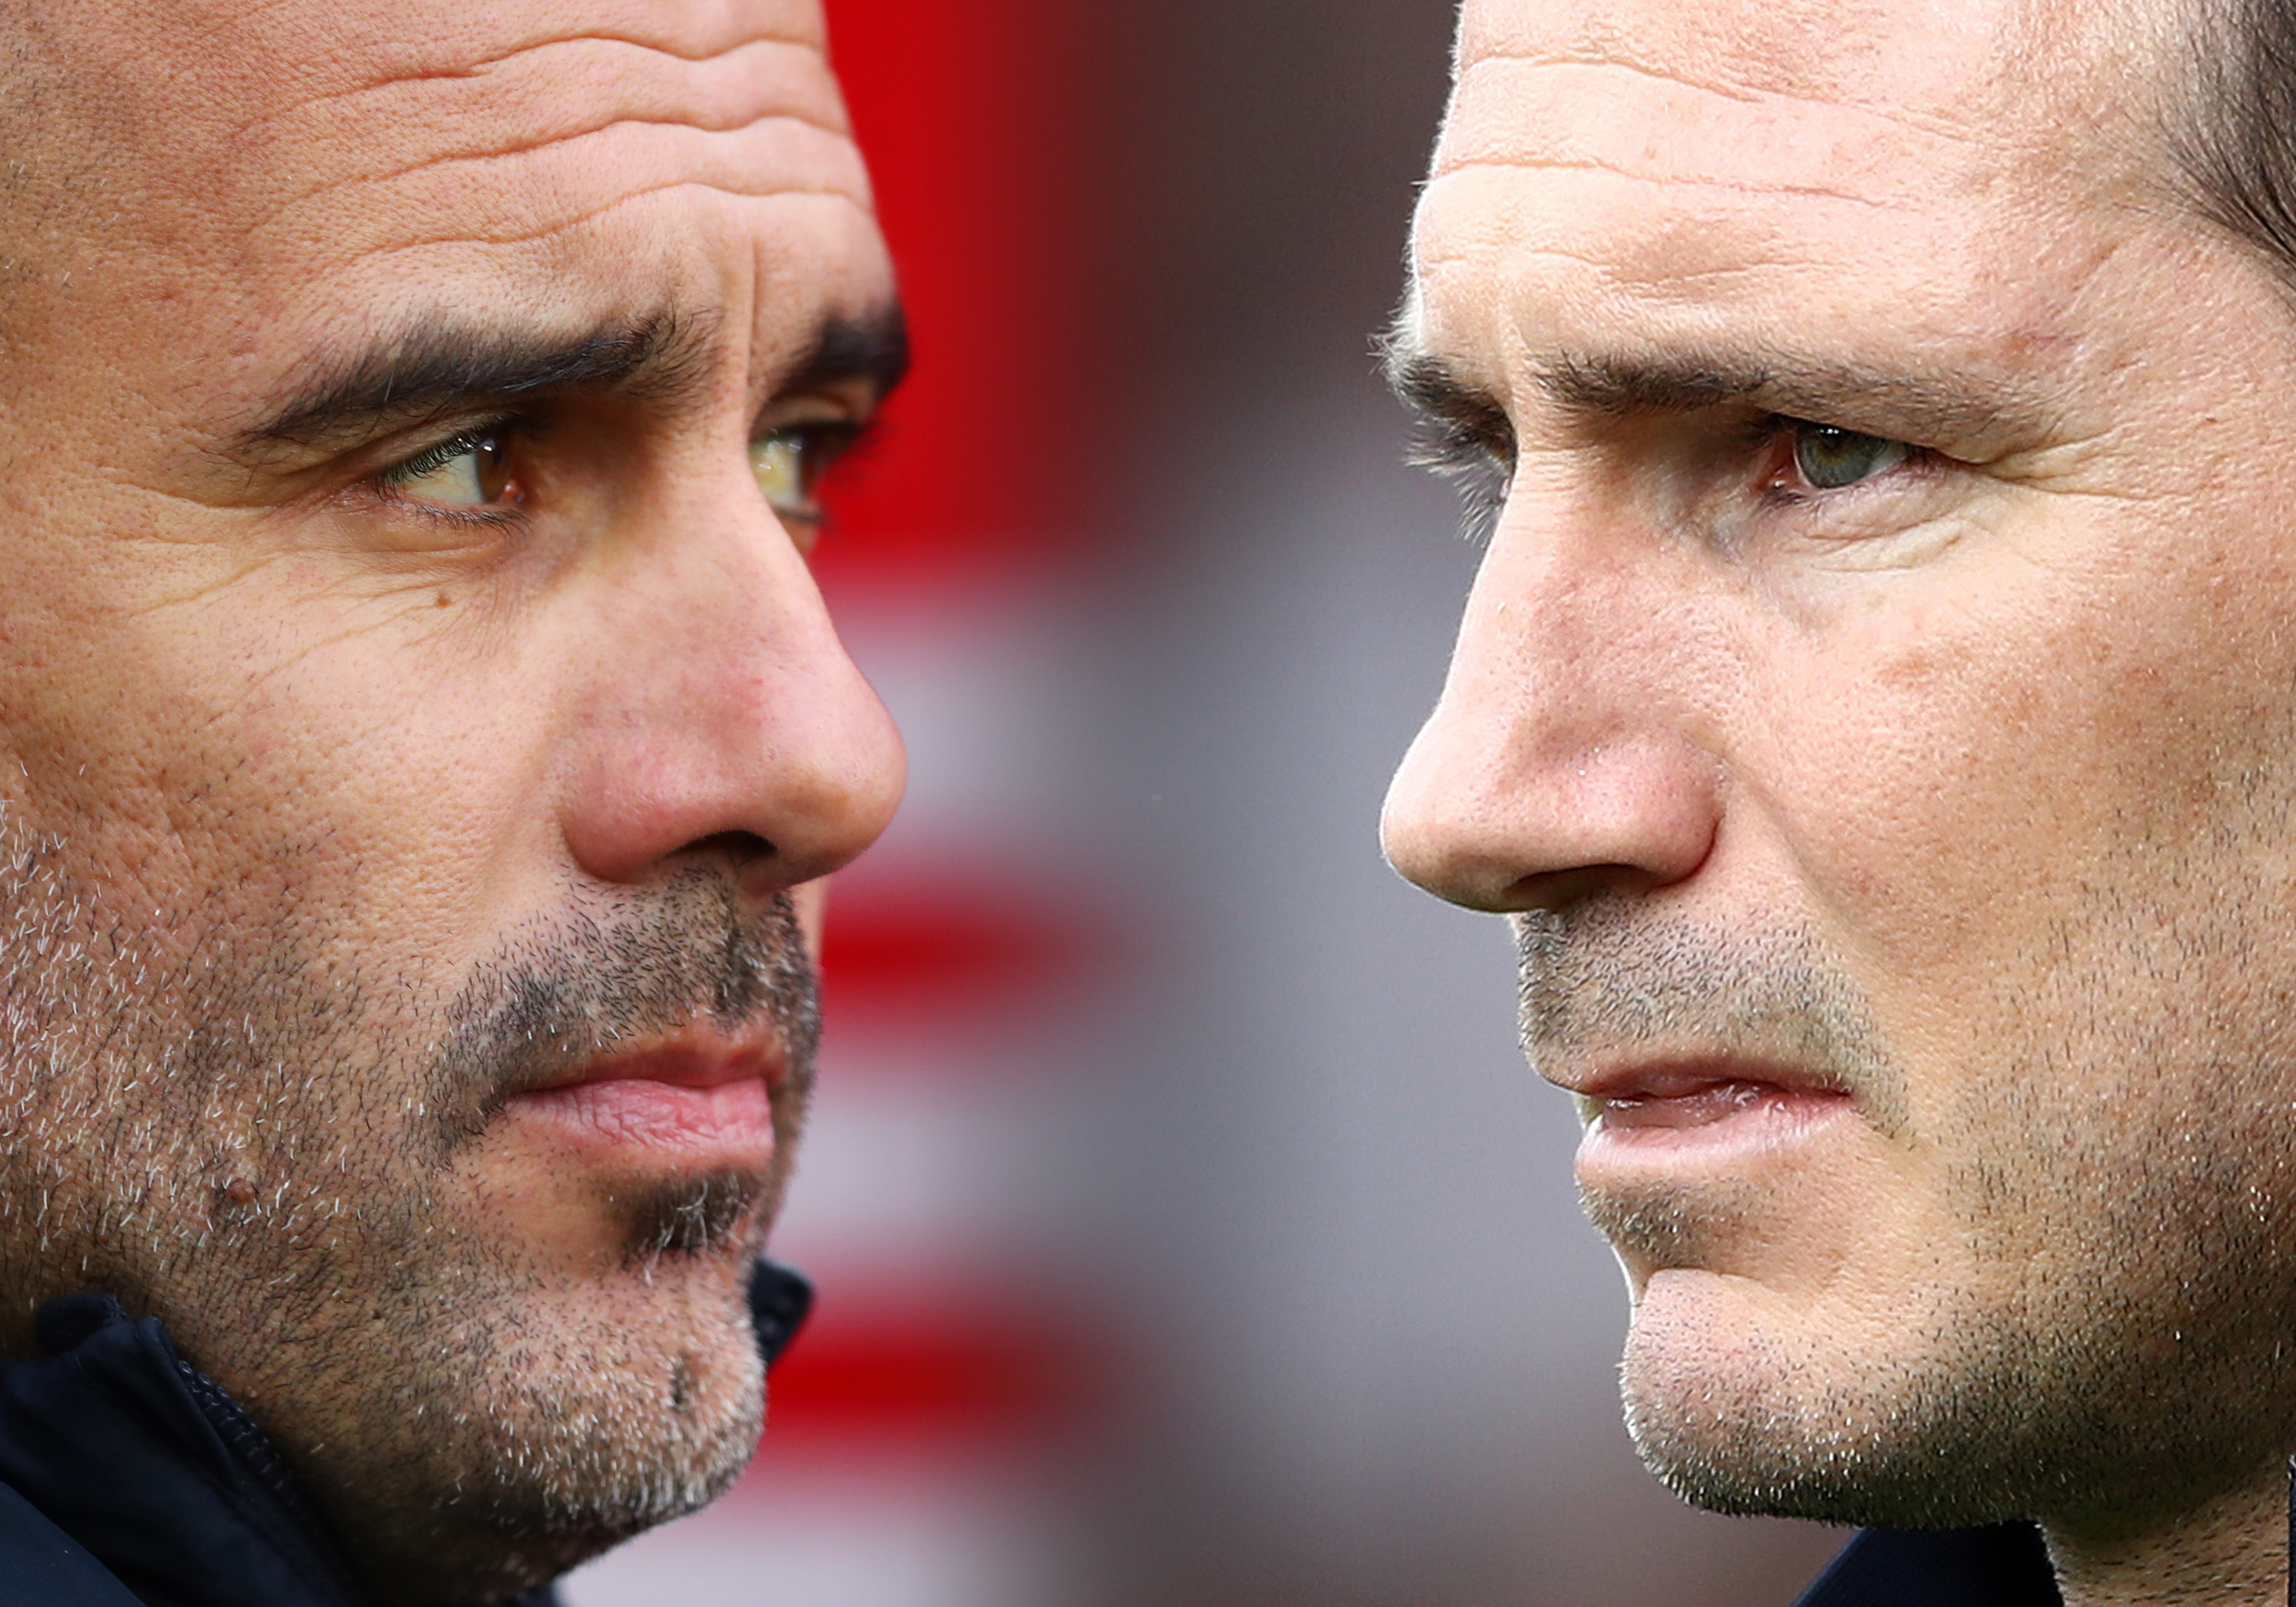 FILE PHOTO (EDITORS NOTE: COMPOSITE OF IMAGES - Image numbers 1089388290,1179353482 - GRADIENT ADDED) In this composite image a comparison has been made between Pep Guardiola, manager of Manchester City and Frank Lampard, Manager of Chelsea. Manchester City and Chelsea FC meet in a Premier League   fixture on November 23,2019 at the Etihad Stadium in Manchester,England. ***LEFT IMAGE*** SOUTHAMPTON, ENGLAND - DECEMBER 30: Pep Guardiola, manager of Manchester City looks on before the Premier League match between Southampton FC and Manchester City at St Mary's Stadium on December 30, 2018 in Southampton, United Kingdom. (Photo by Dan Istitene/Getty Images) ***RIGHT IMAGE*** SOUTHAMPTON, ENGLAND - OCTOBER 06: Frank Lampard, Manager of Chelsea looks on prior to the Premier League match between Southampton FC and Chelsea FC at St Mary's Stadium on October 06, 2019 in Southampton, United Kingdom. (Photo by Bryn Lennon/Getty Images)